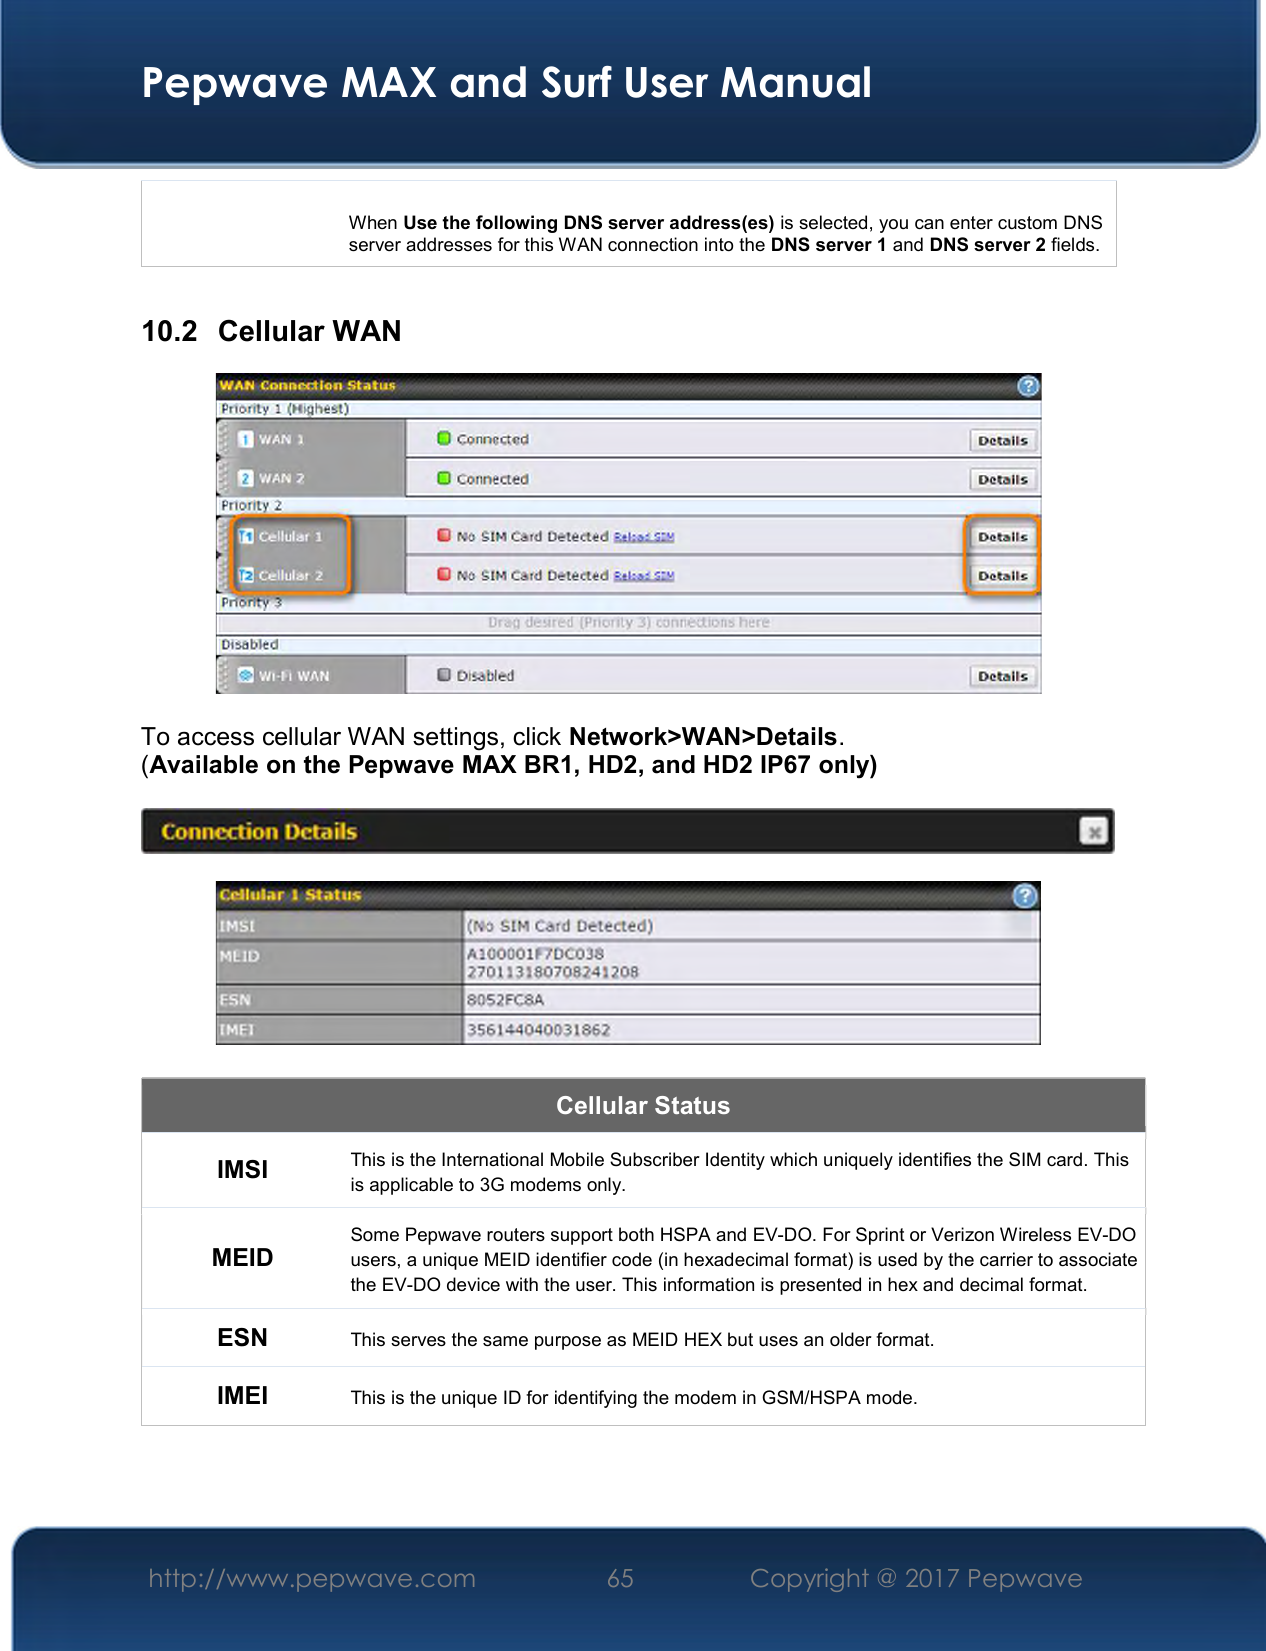  Pepwave MAX and Surf User Manual http://www.pepwave.com  65    Copyright @ 2017 Pepwave    When Use the following DNS server address(es) is selected, you can enter custom DNS server addresses for this WAN connection into the DNS server 1 and DNS server 2 fields.  10.2  Cellular WAN   To access cellular WAN settings, click Network&gt;WAN&gt;Details. (Available on the Pepwave MAX BR1, HD2, and HD2 IP67 only)      Cellular Status IMSI This is the International Mobile Subscriber Identity which uniquely identifies the SIM card. This is applicable to 3G modems only. MEID Some Pepwave routers support both HSPA and EV-DO. For Sprint or Verizon Wireless EV-DO users, a unique MEID identifier code (in hexadecimal format) is used by the carrier to associate the EV-DO device with the user. This information is presented in hex and decimal format. ESN This serves the same purpose as MEID HEX but uses an older format. IMEI This is the unique ID for identifying the modem in GSM/HSPA mode.  